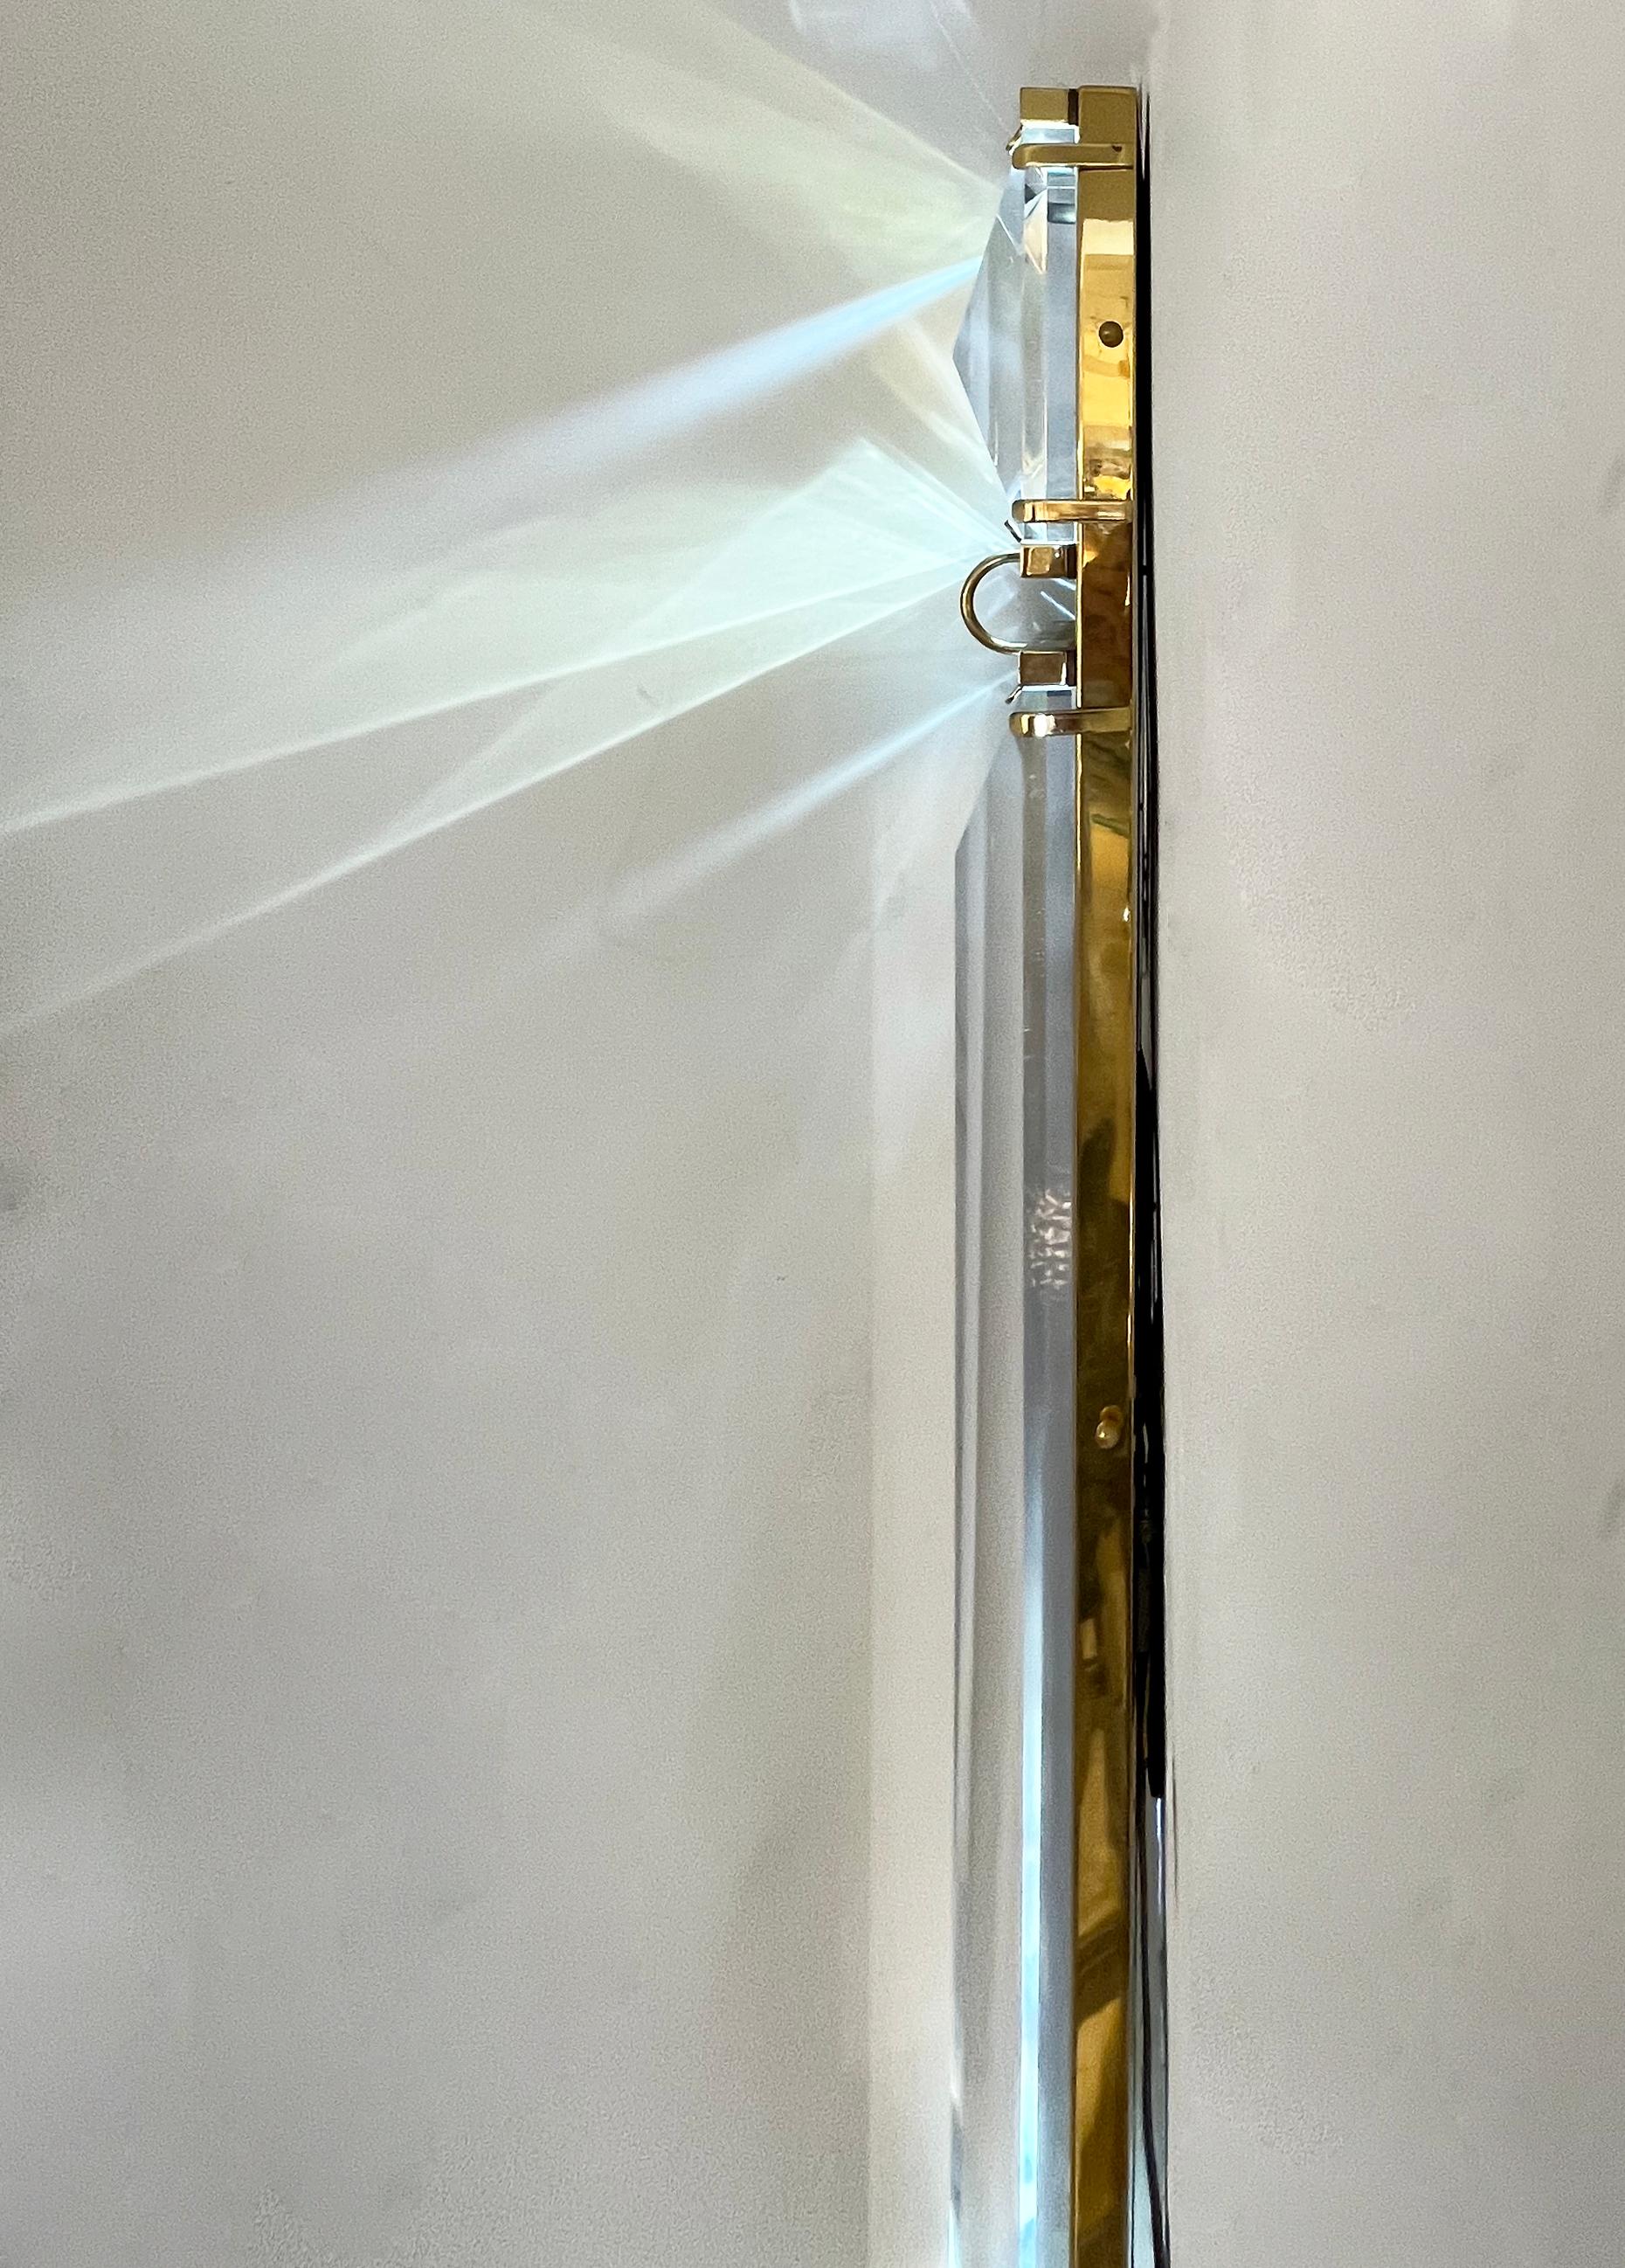 These colossal sconces will leave a statement for any entryway or any space. Unique one-of-a-kind sleek organic design entirely handcrafted in Italy, extremely decorative with sophistication, composed of a handmade brass back plate, with diamond-cut